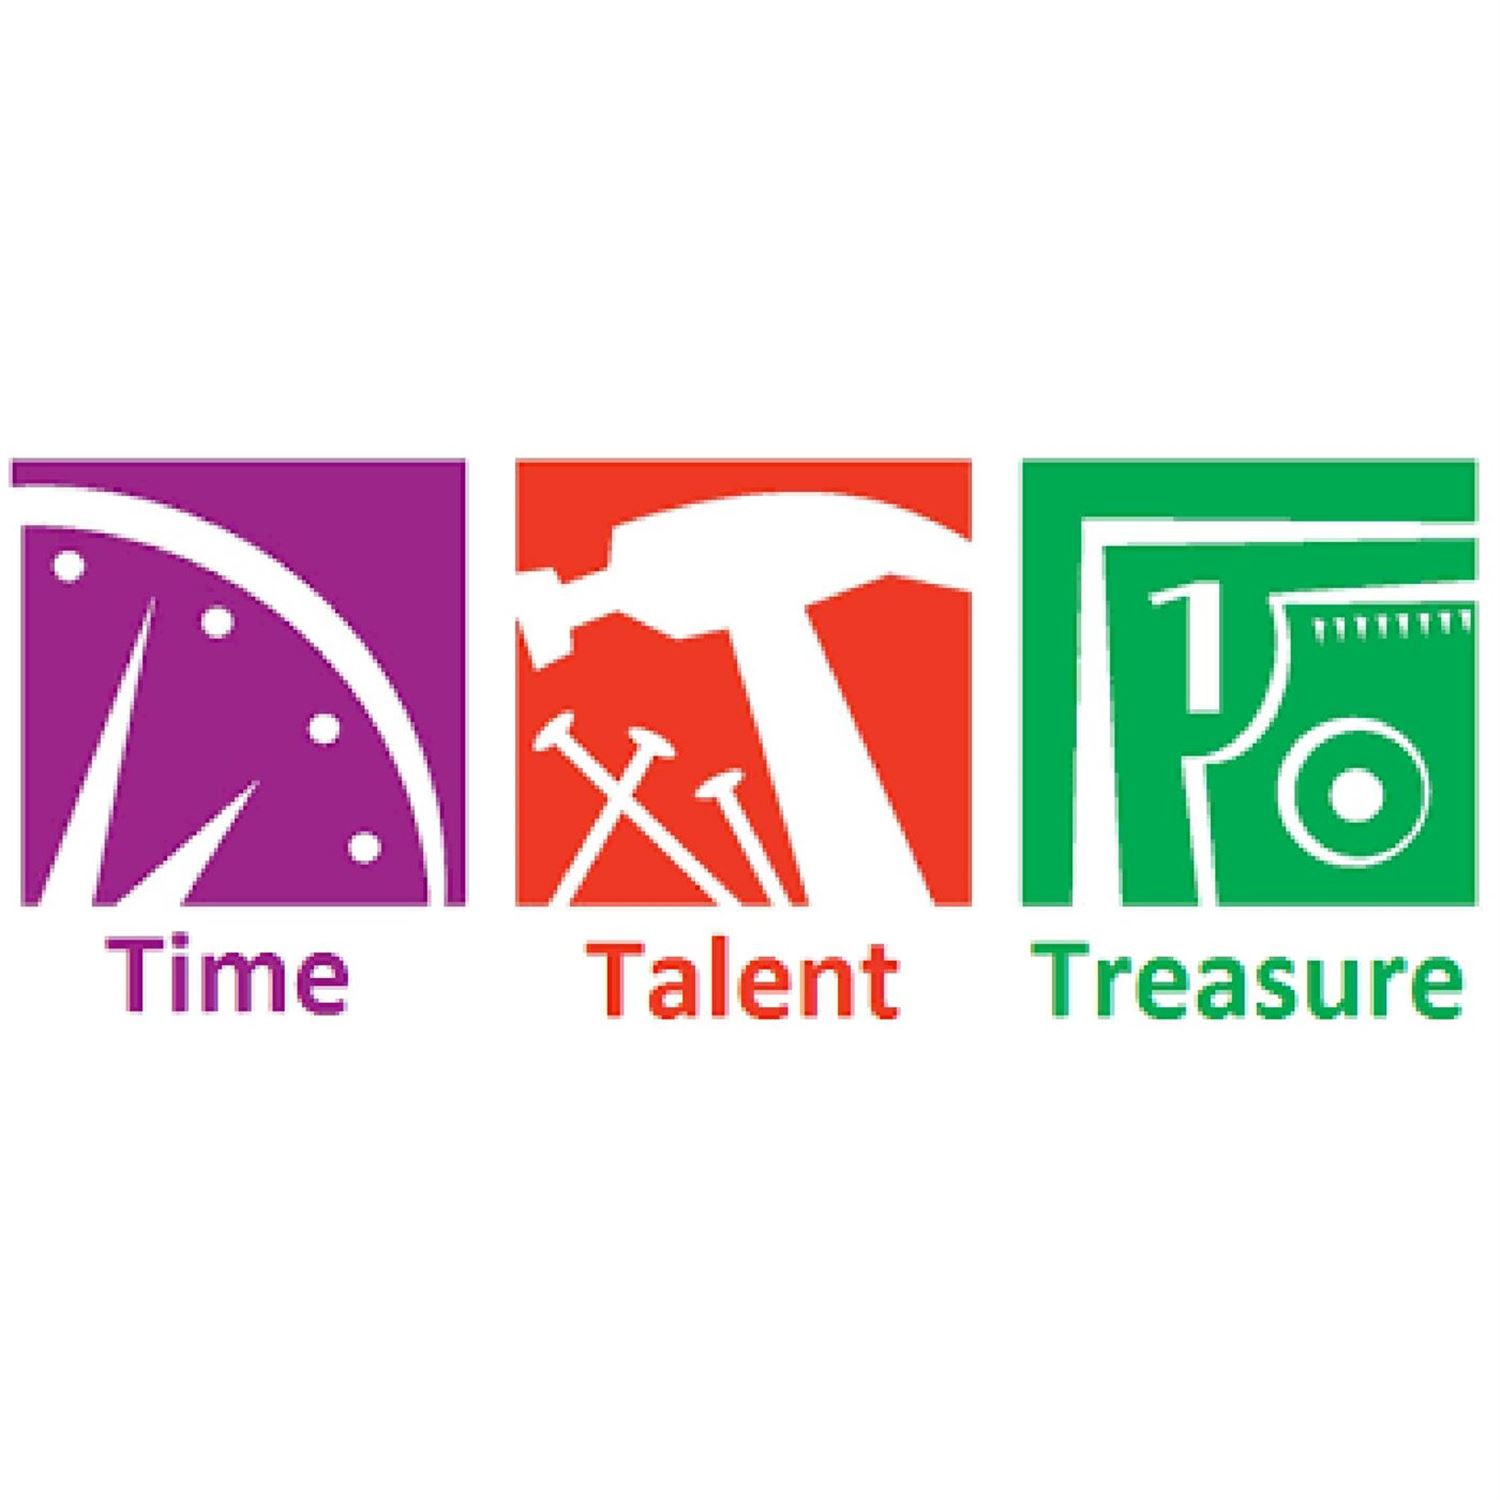 Time, talent and treasure